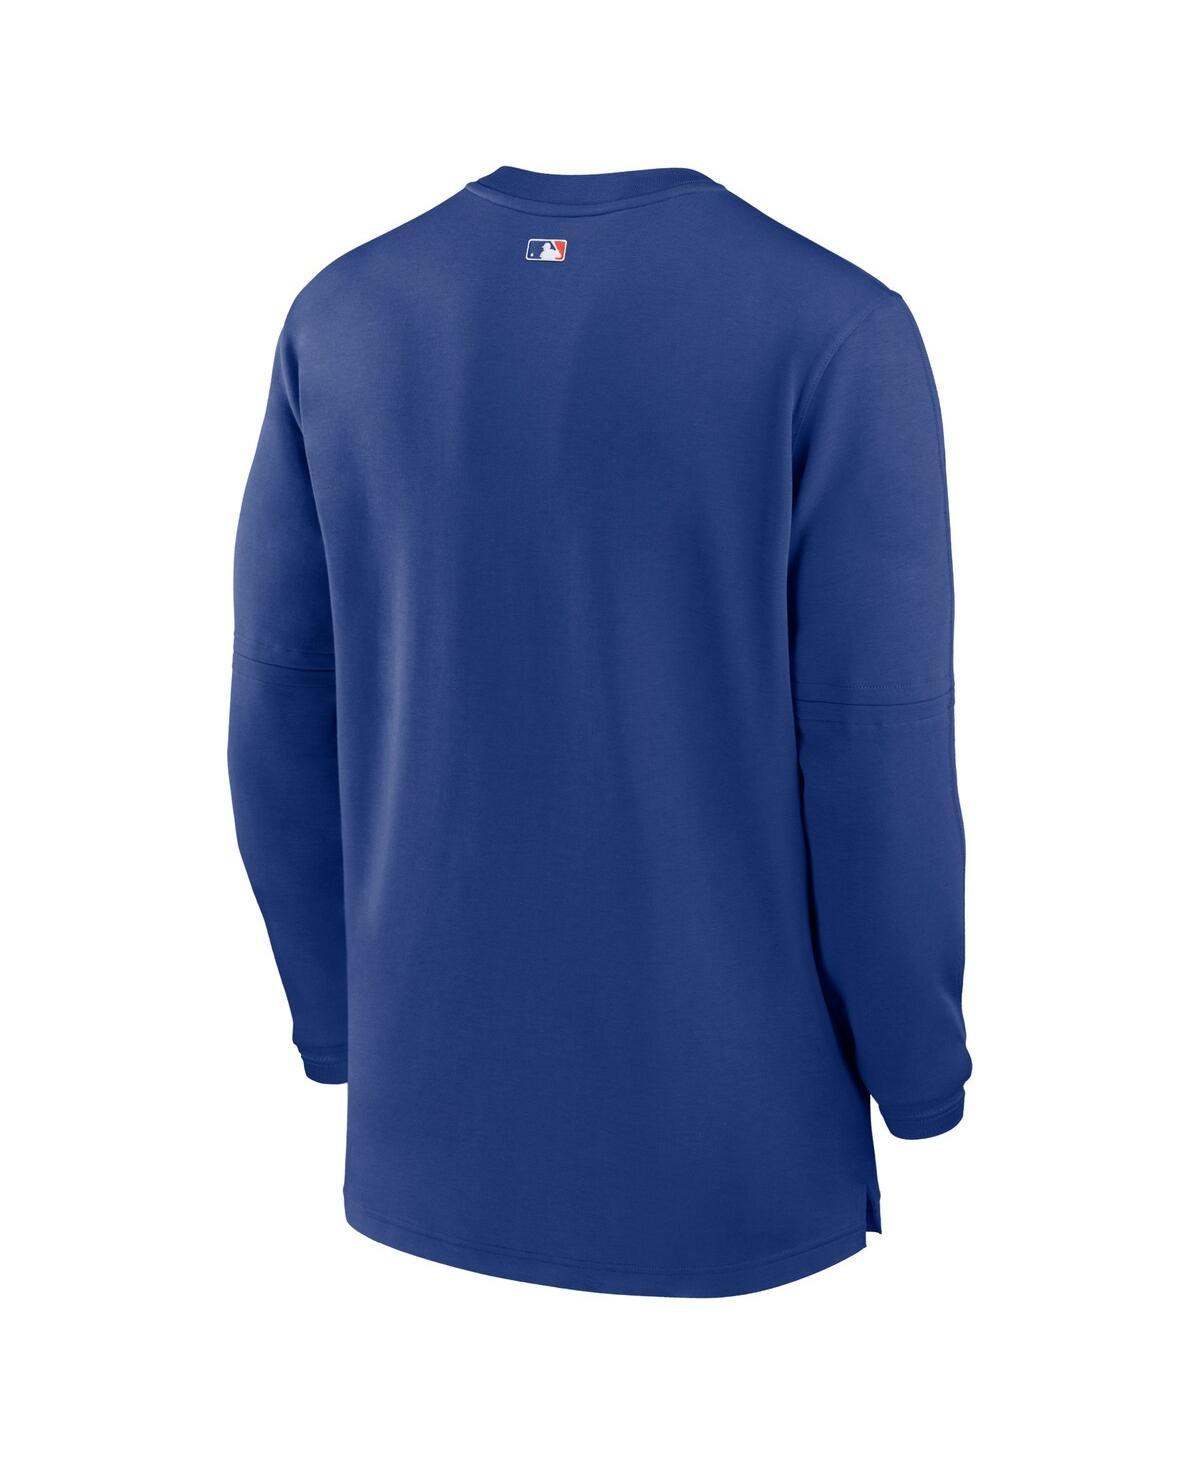 Shop Nike Men's  Royal New York Mets Authentic Collection Game Time Performance Quarter-zip Top